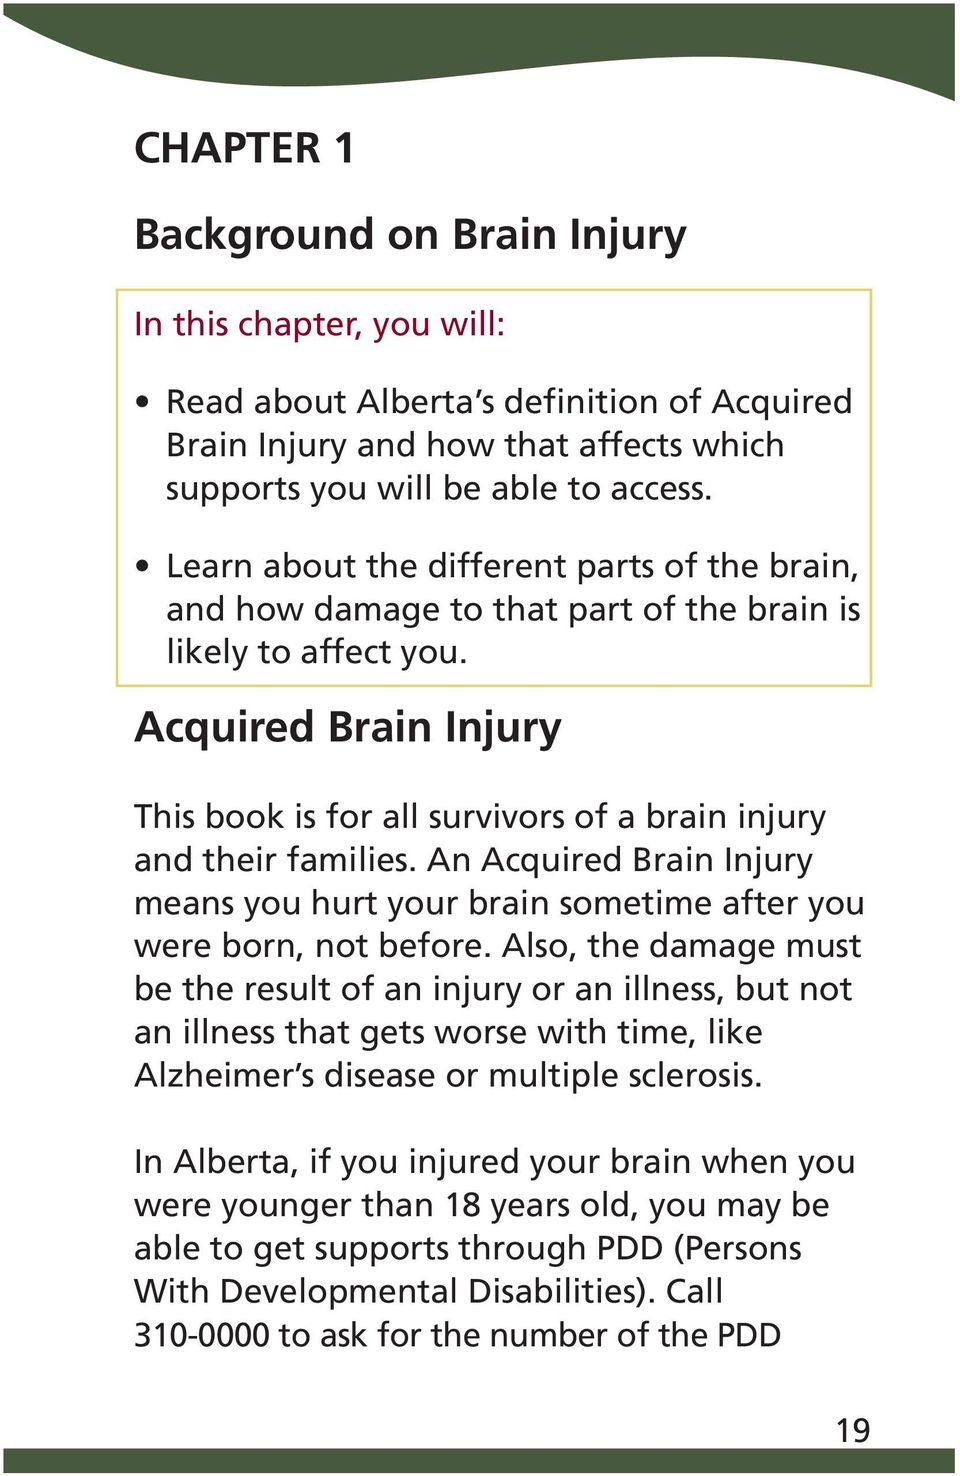 Acquired Brain Injury This book is for all survivors of a brain injury and their families. An Acquired Brain Injury means you hurt your brain sometime after you were born, not before.